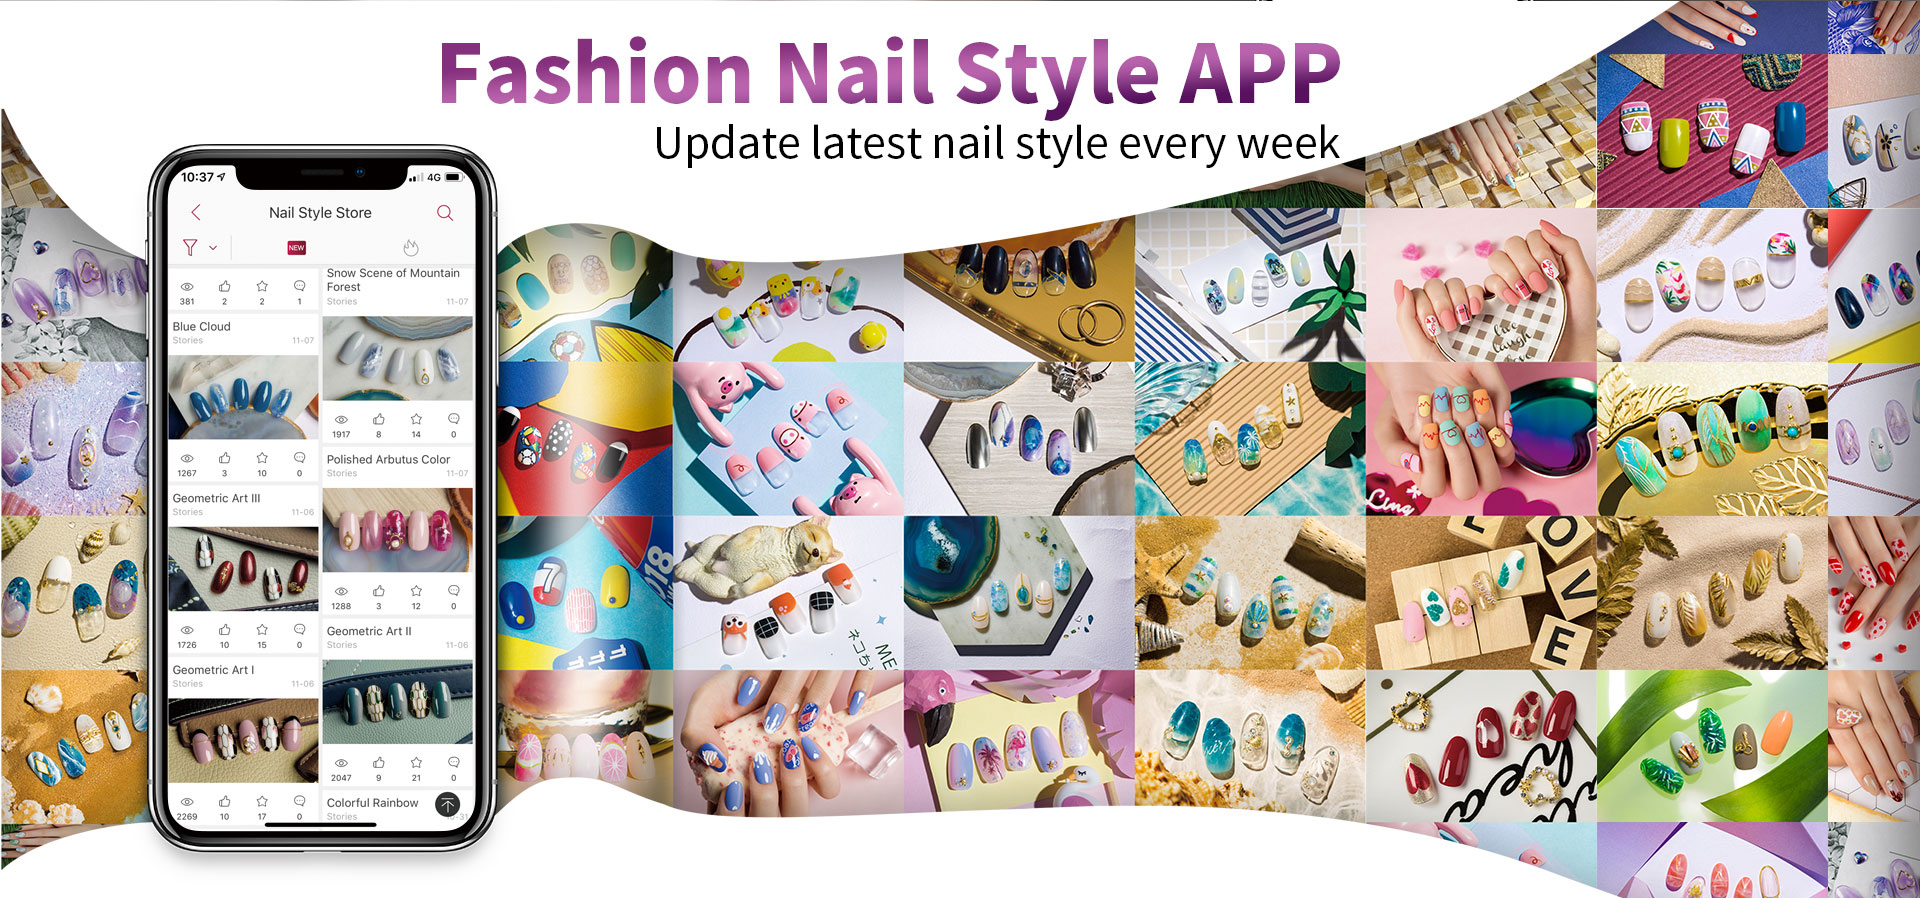 fashion nail style APP update latest nail style every week